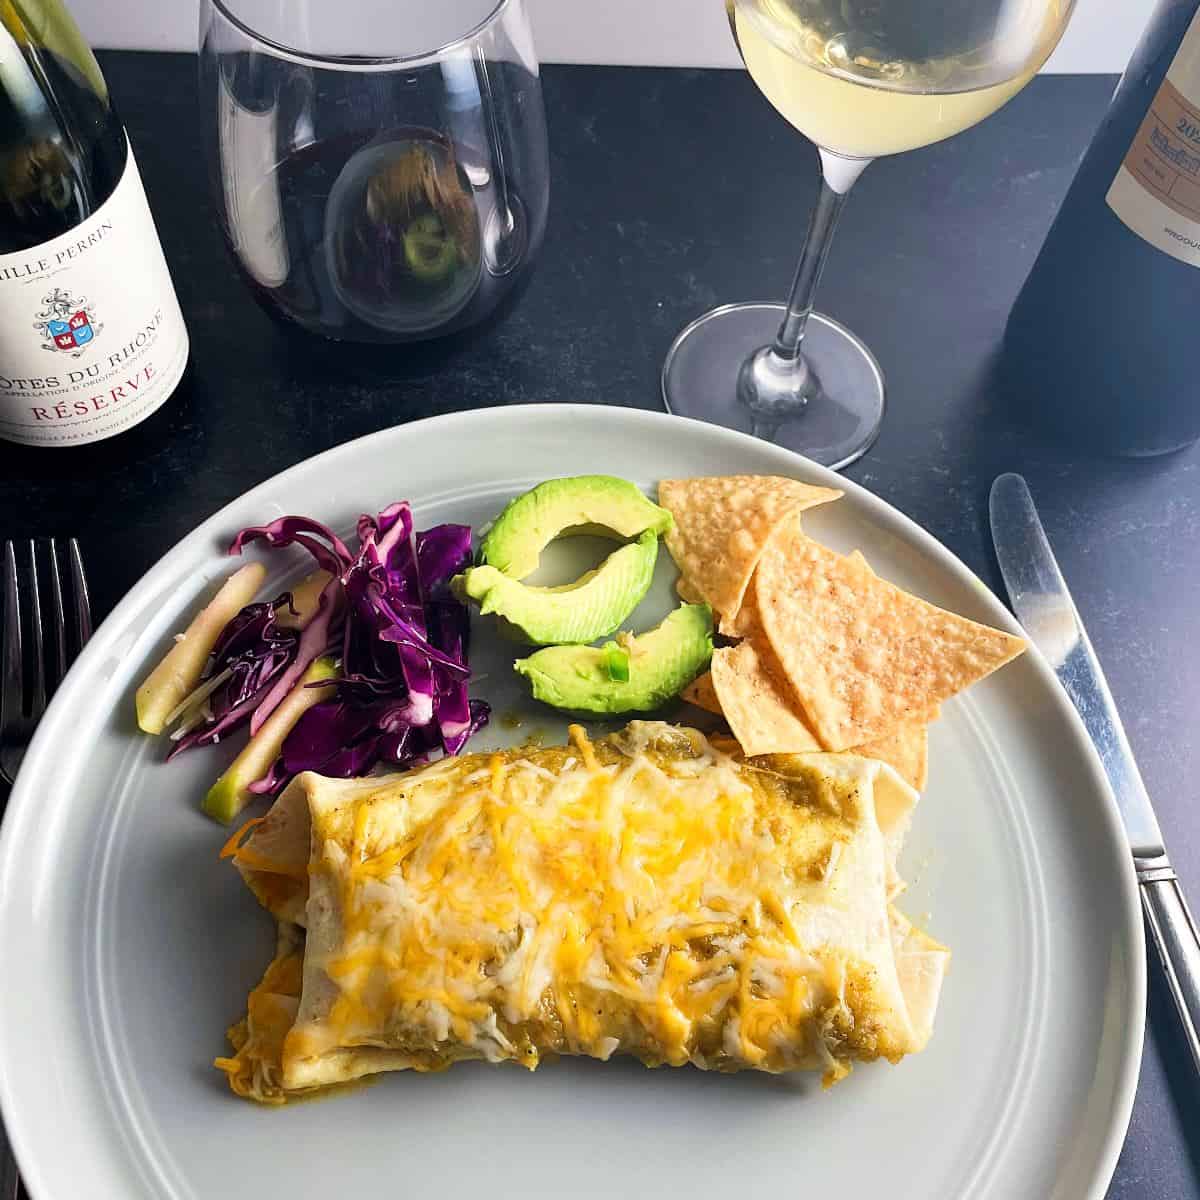 chicken enchiladas on a plate with red cabbage, sliced avocado and a red and white wine in the background.